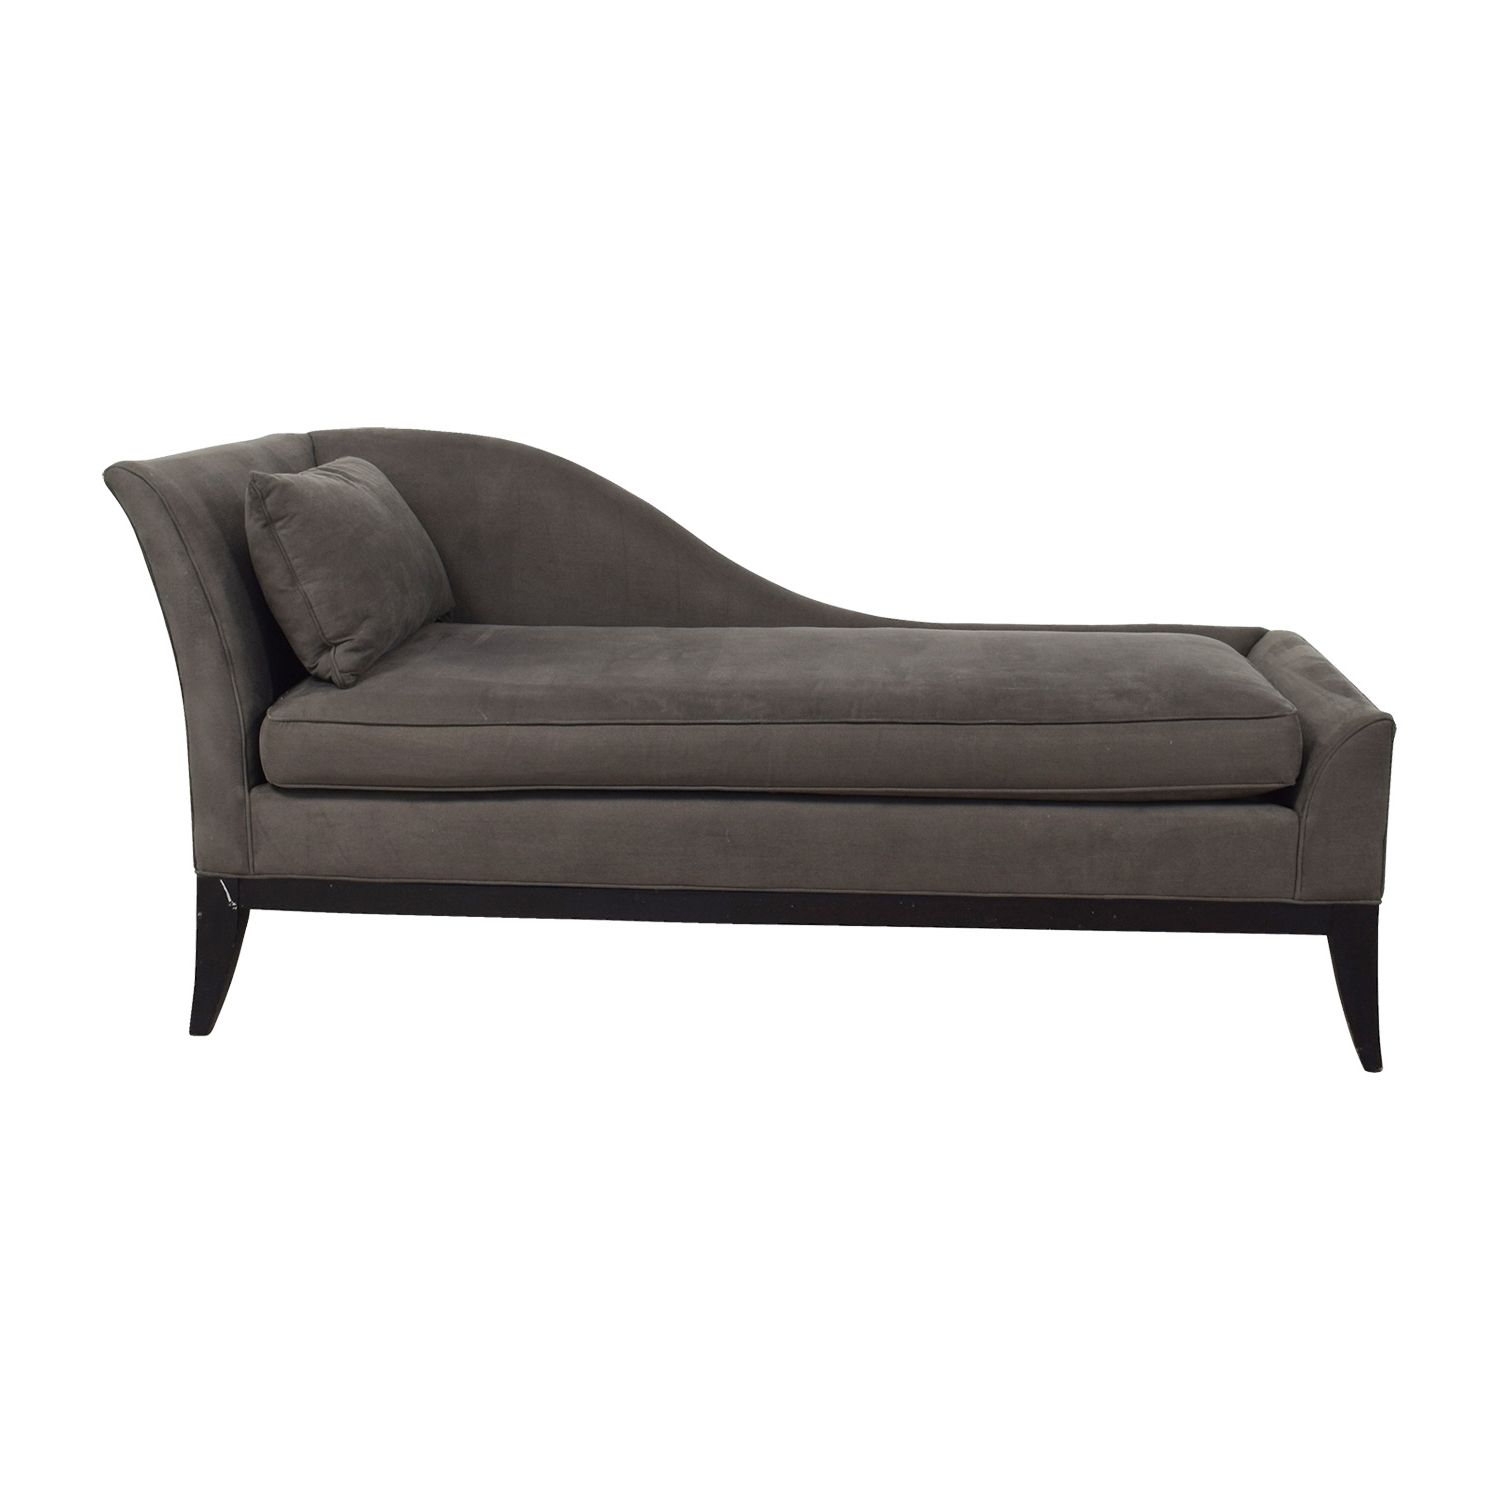 [%75% Off – Grey Chaise Lounge / Sofas With Most Recent Grey Chaise Lounge Chairs|Grey Chaise Lounge Chairs Throughout Best And Newest 75% Off – Grey Chaise Lounge / Sofas|Current Grey Chaise Lounge Chairs Pertaining To 75% Off – Grey Chaise Lounge / Sofas|2018 75% Off – Grey Chaise Lounge / Sofas Pertaining To Grey Chaise Lounge Chairs%] (View 4 of 15)